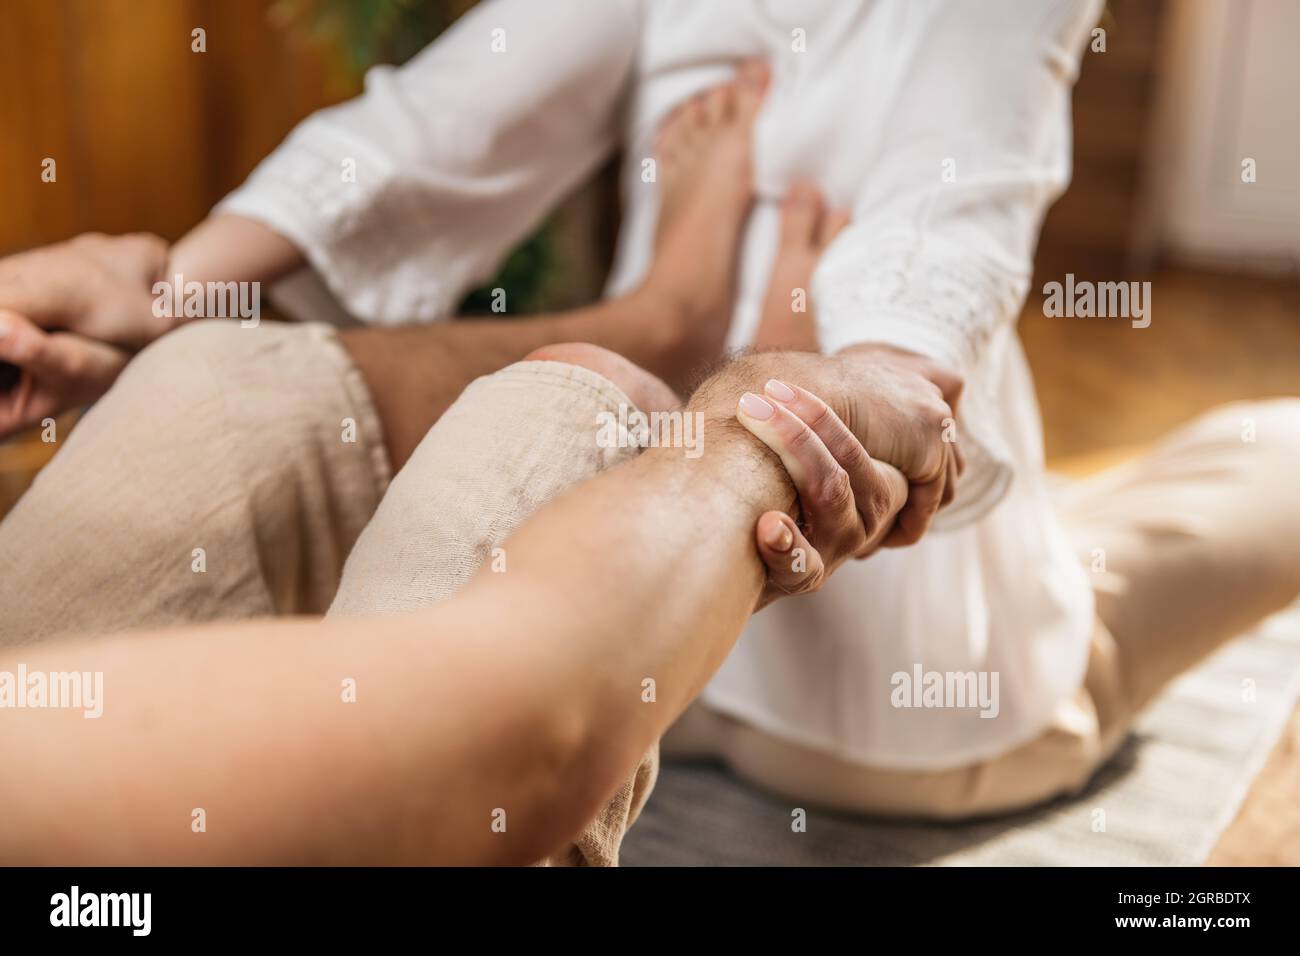 Full Body Massage High Resolution Stock Photography and Images - Alamy